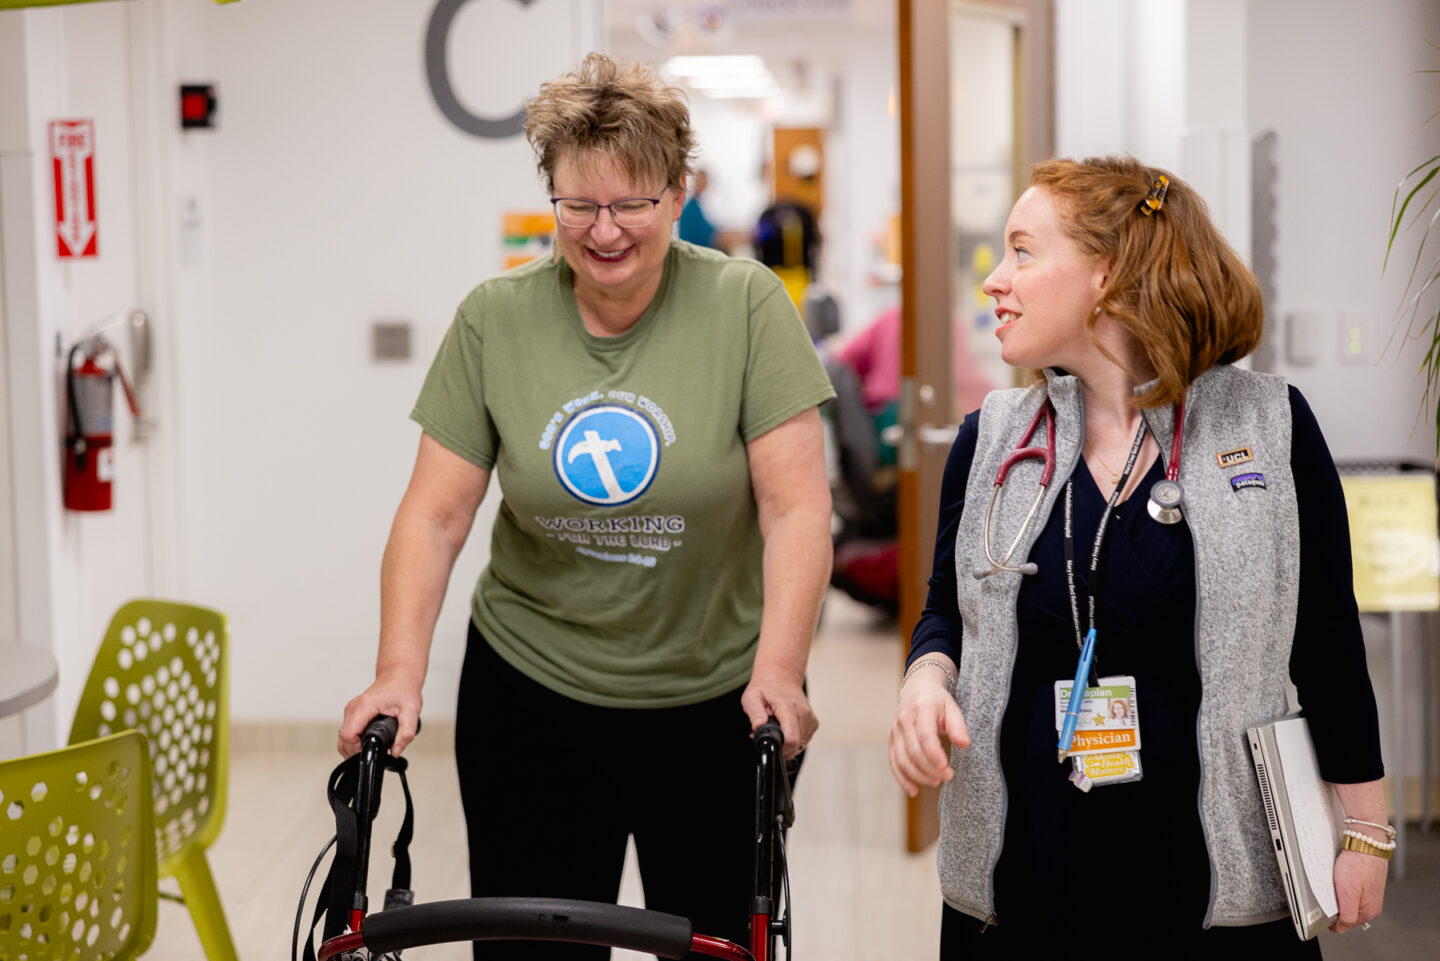 Patient walking with a walker and receiving guidance on fracture prevention.